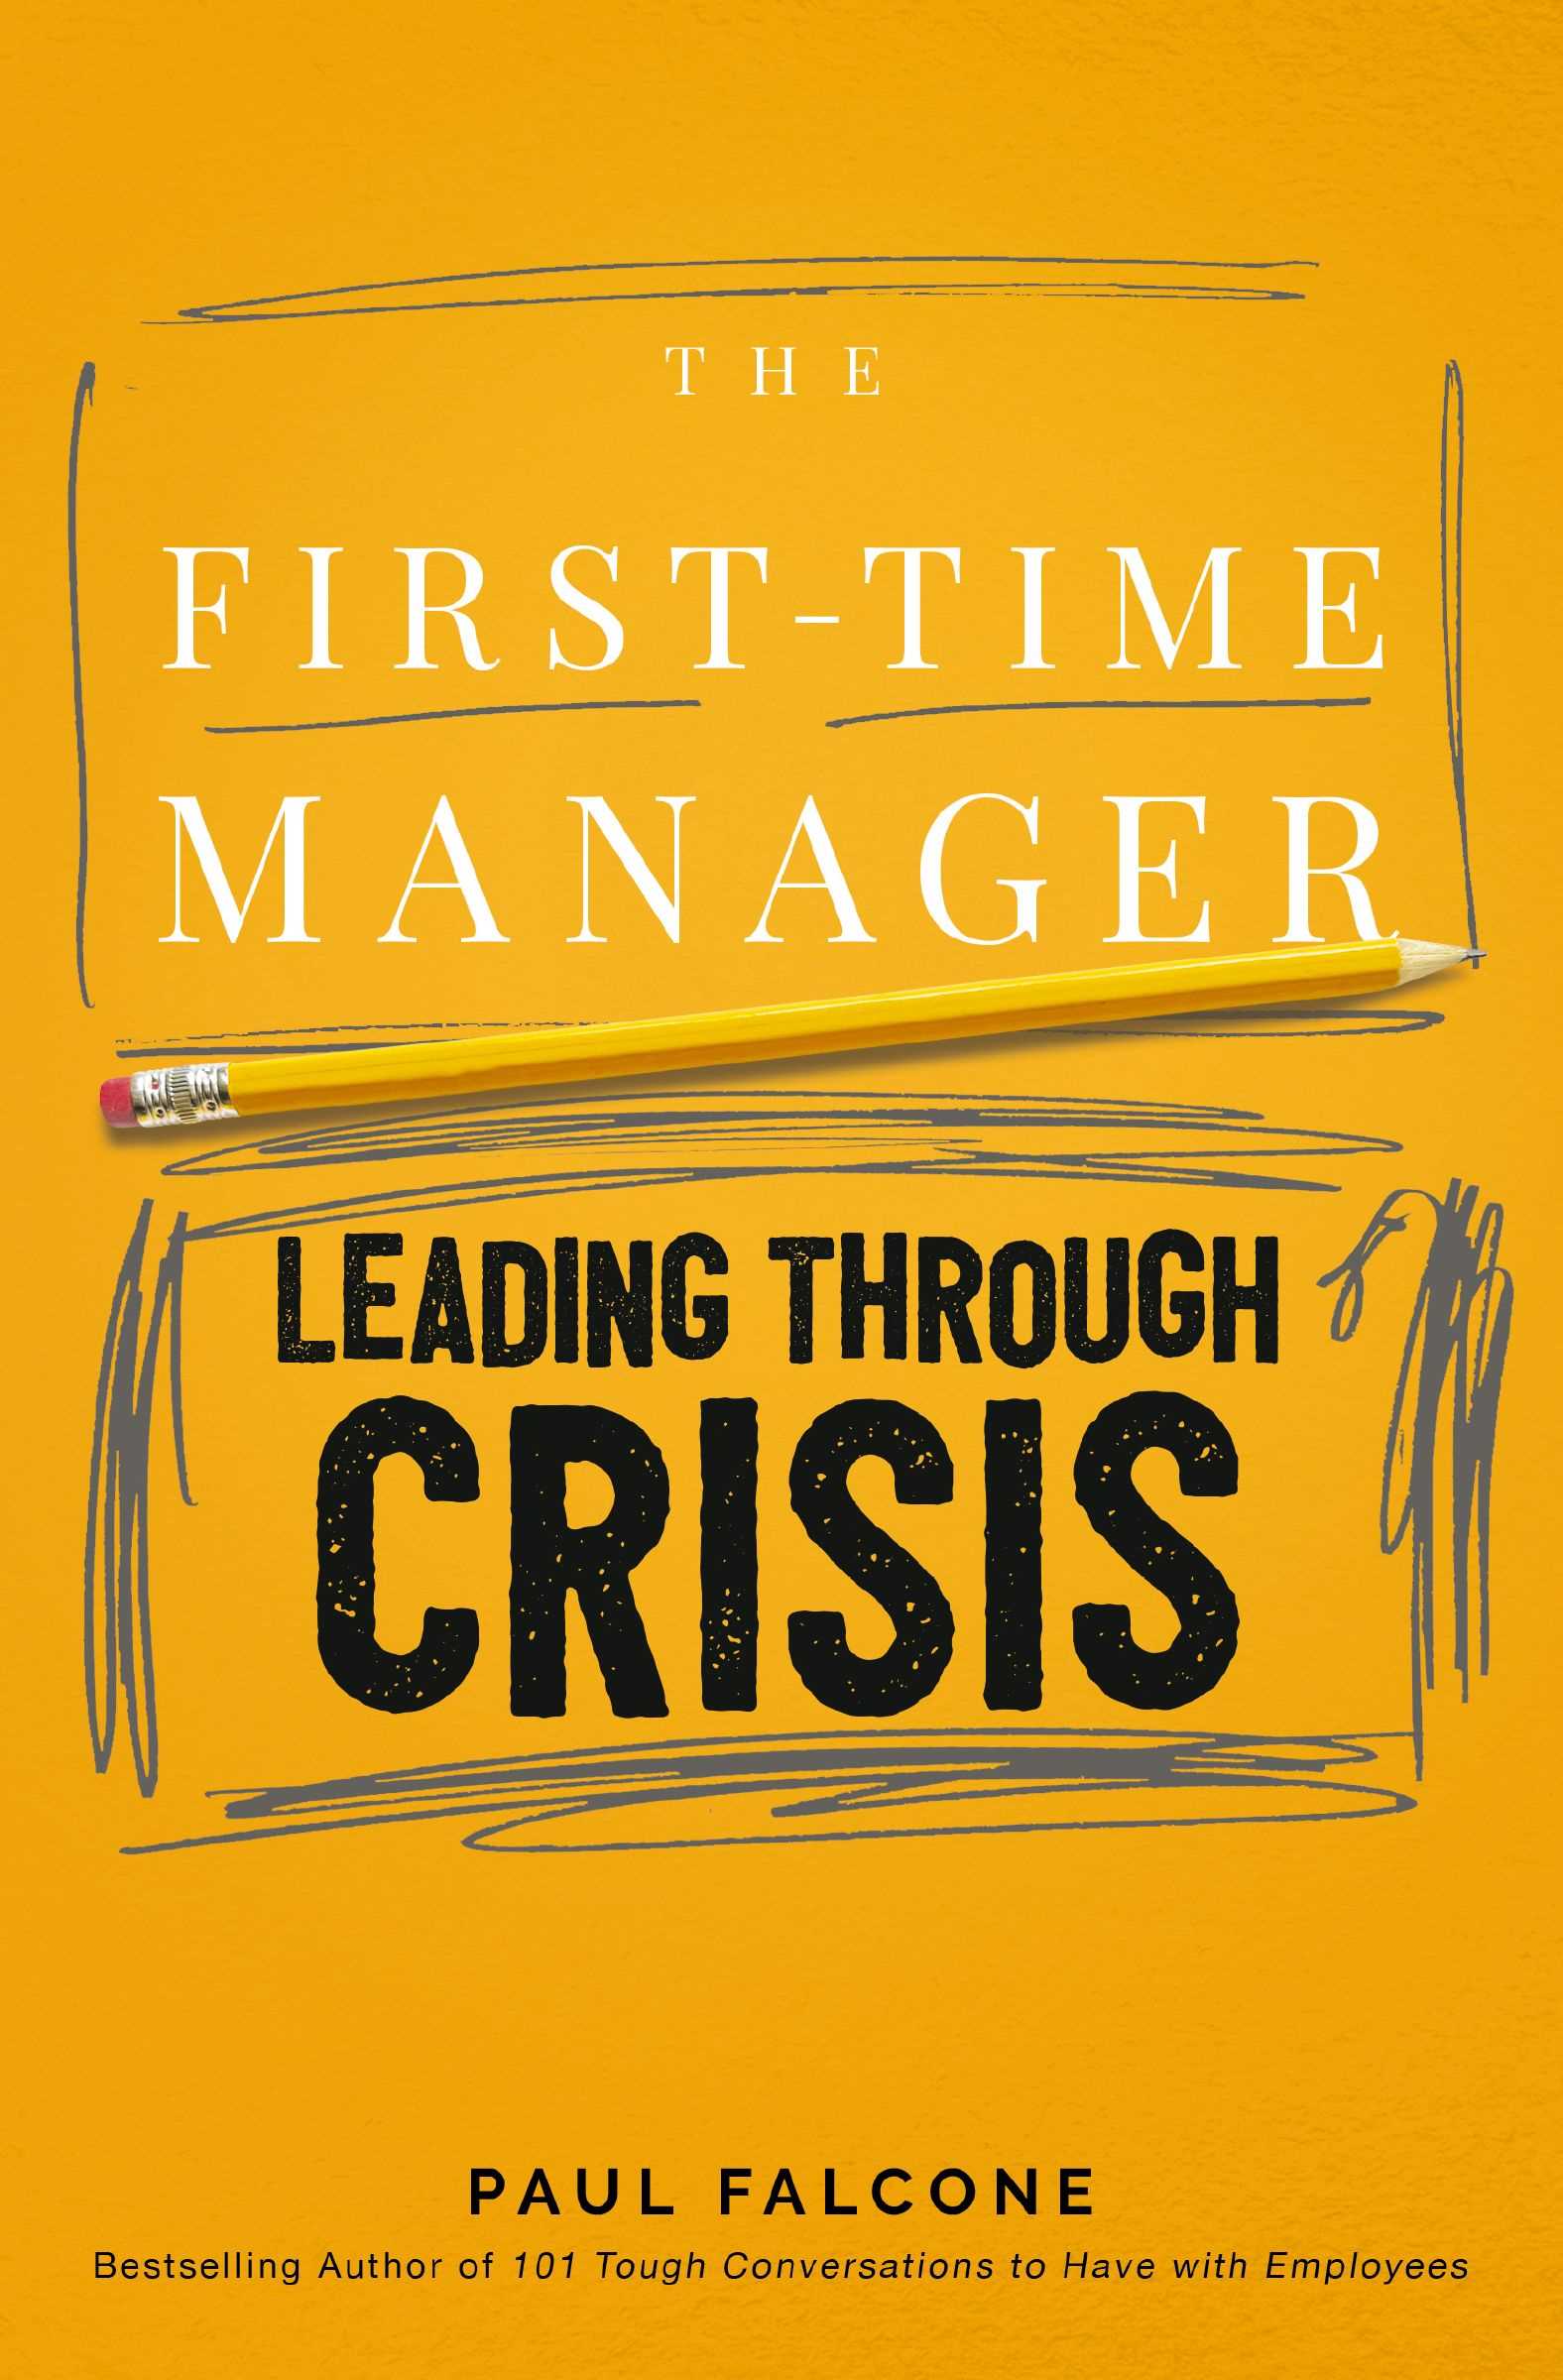 Leading Through Crisis (The First-Time Manager)